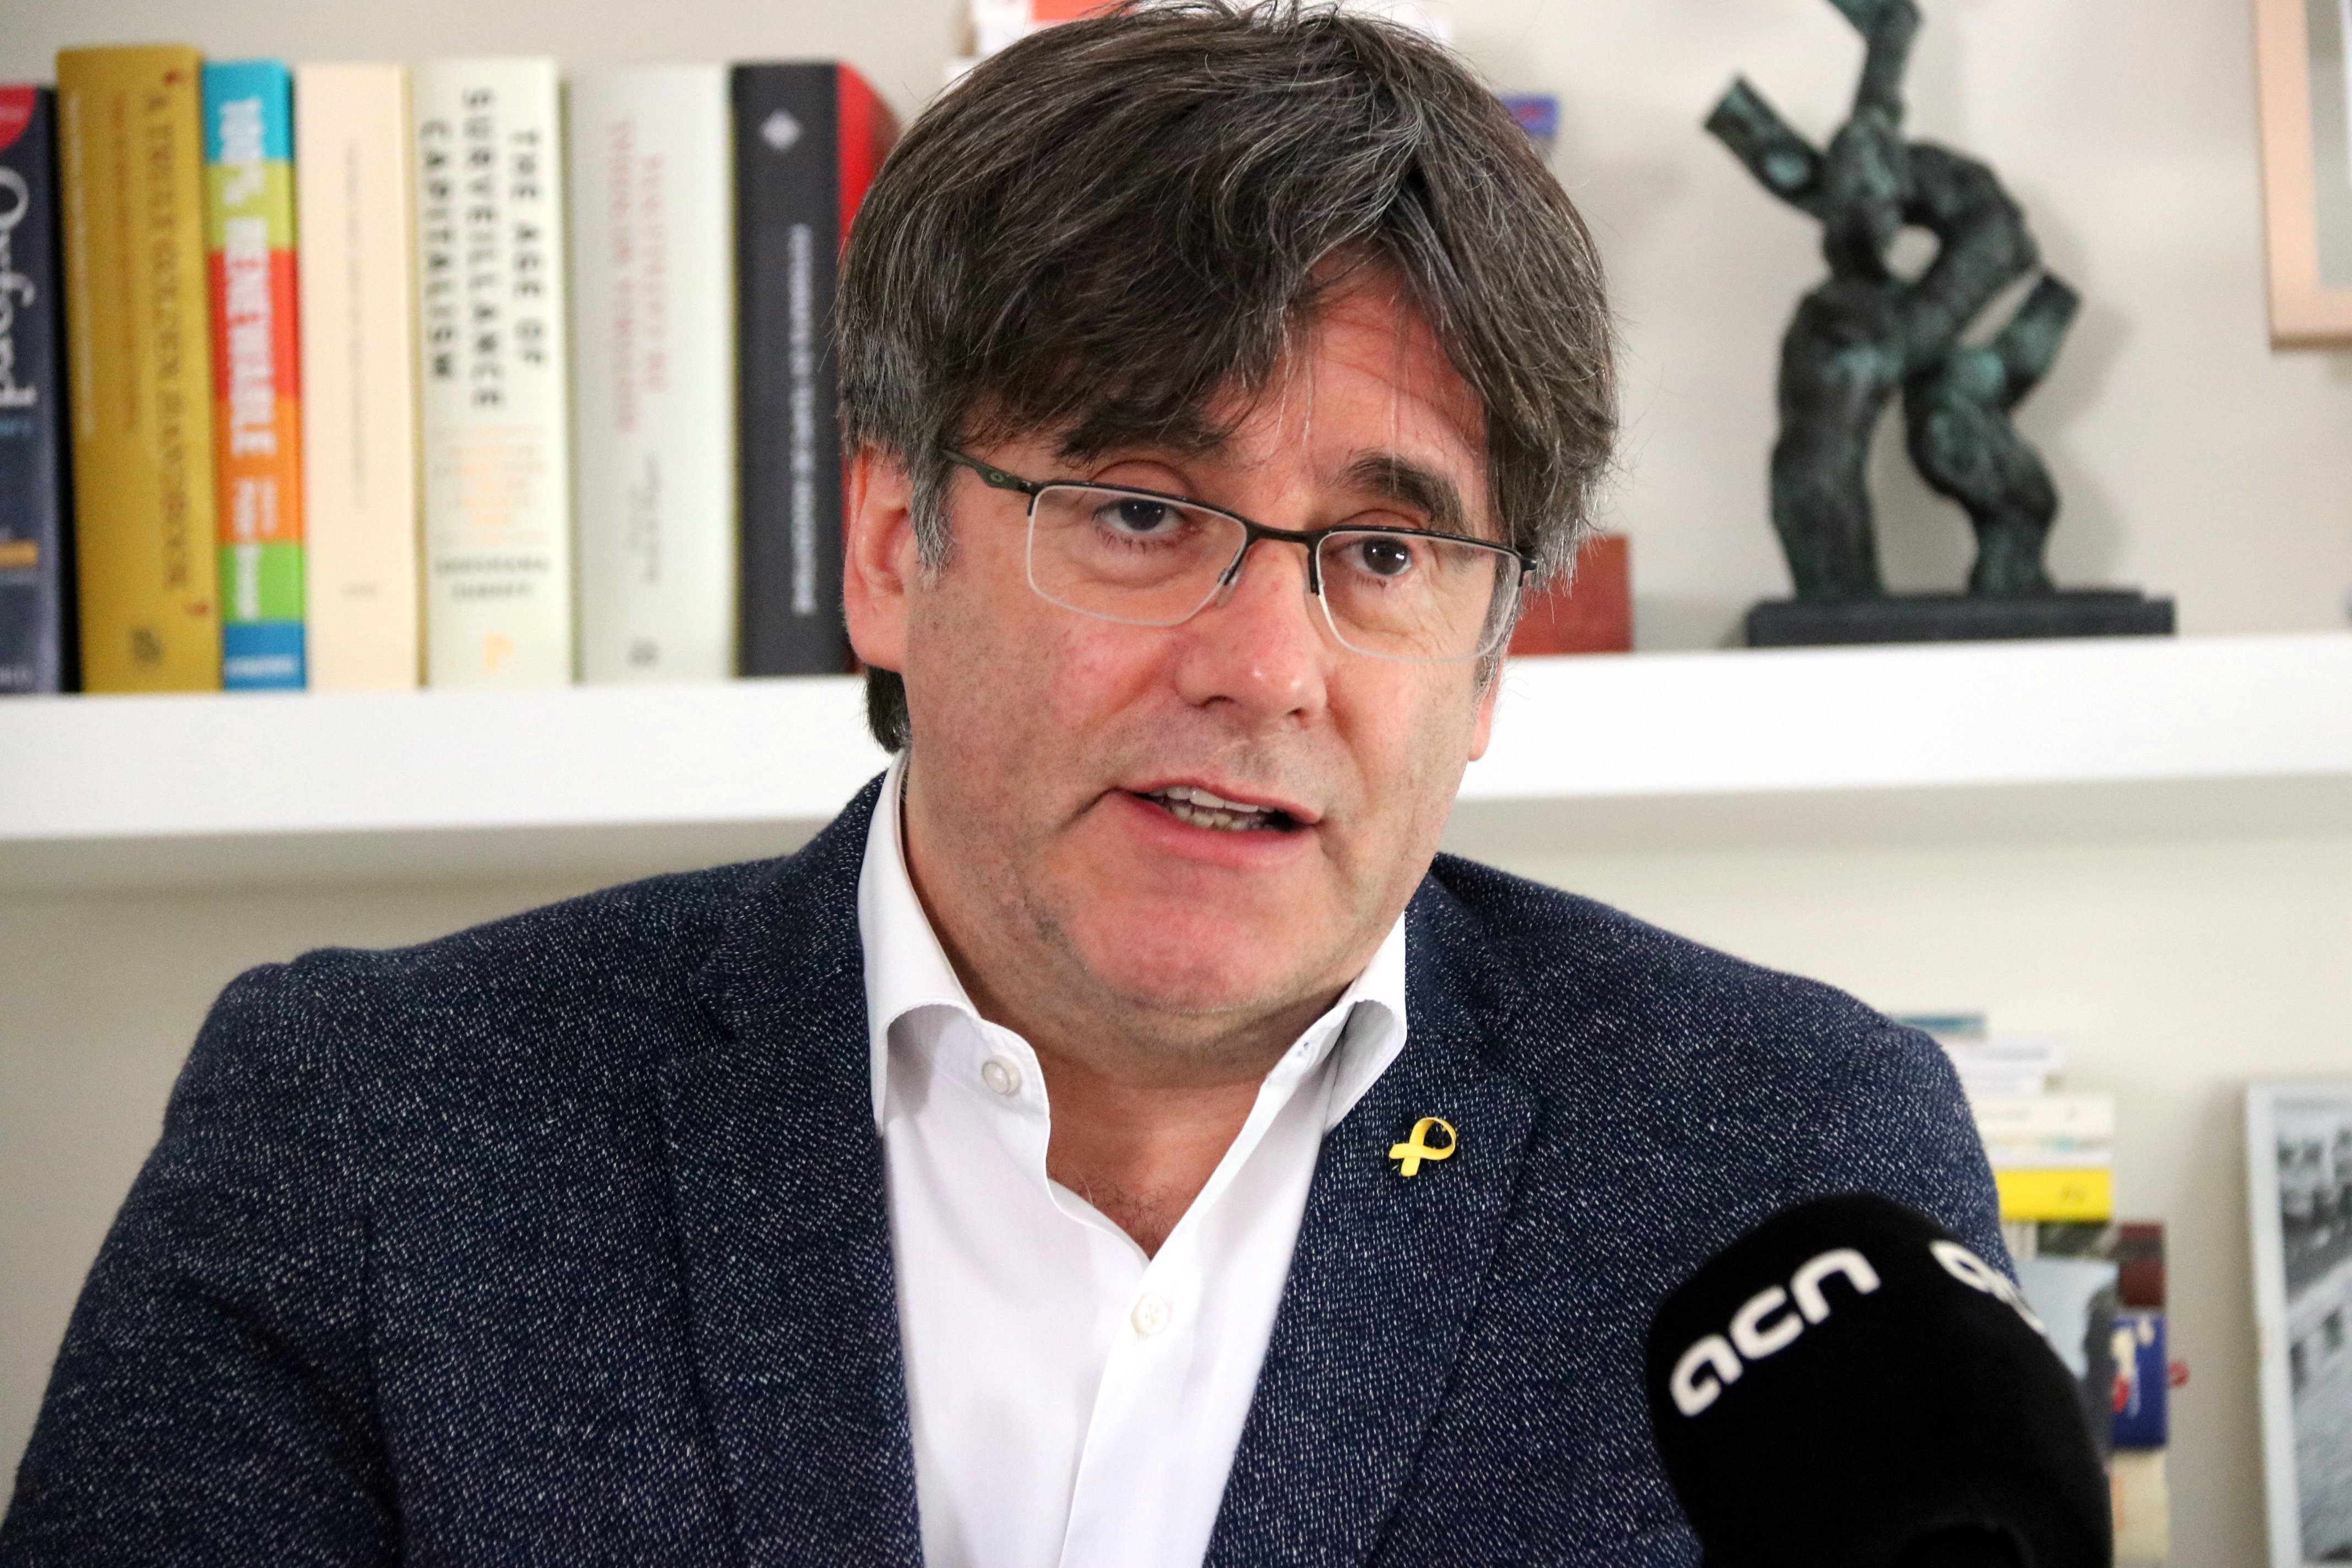 Puigdemont in Northern Catalonia: "It's an honour to be here, at home"